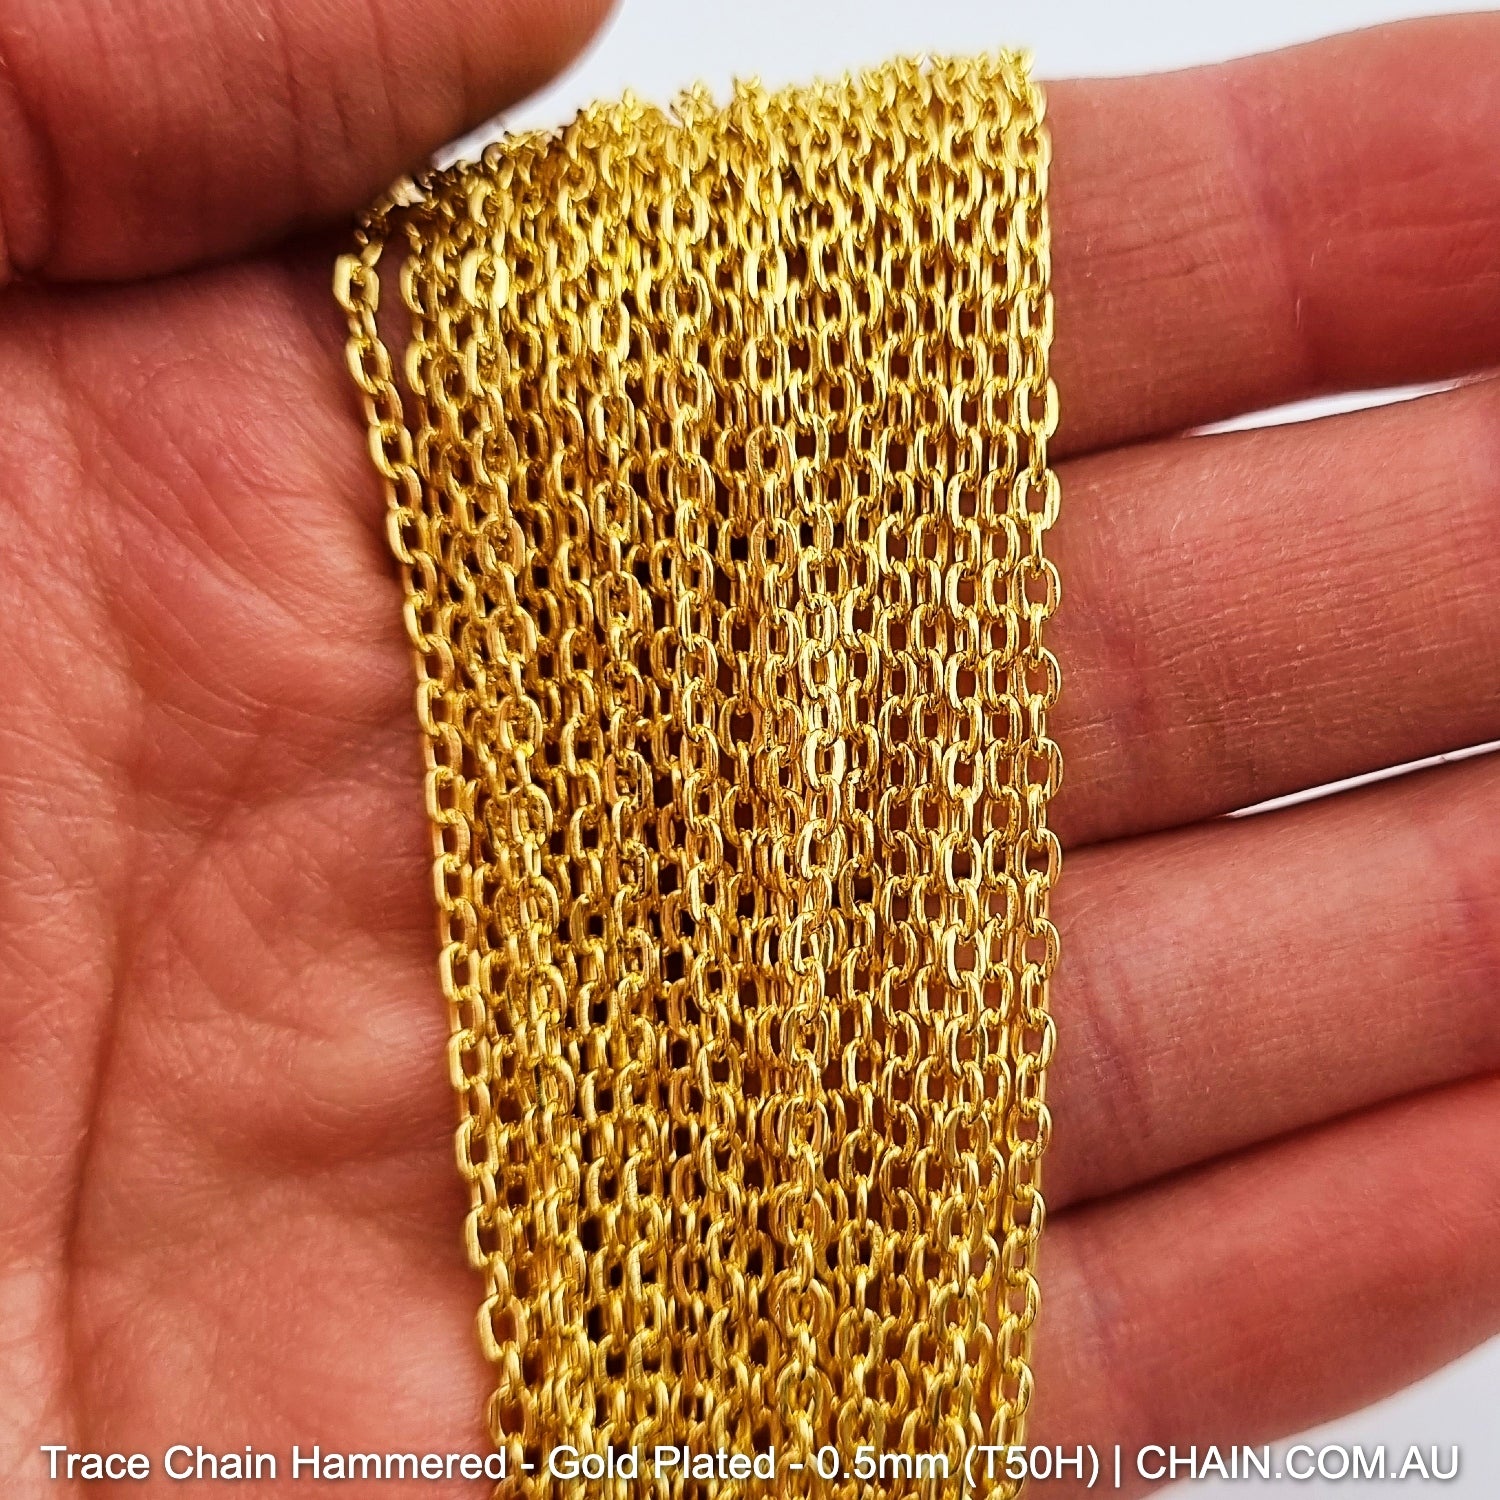 Hammered Trace Chain in a Gold Plated Finish. Size: 0.5mm, T50H. Jewellery Chain, Australia wide shipping. Shop chain.com.au